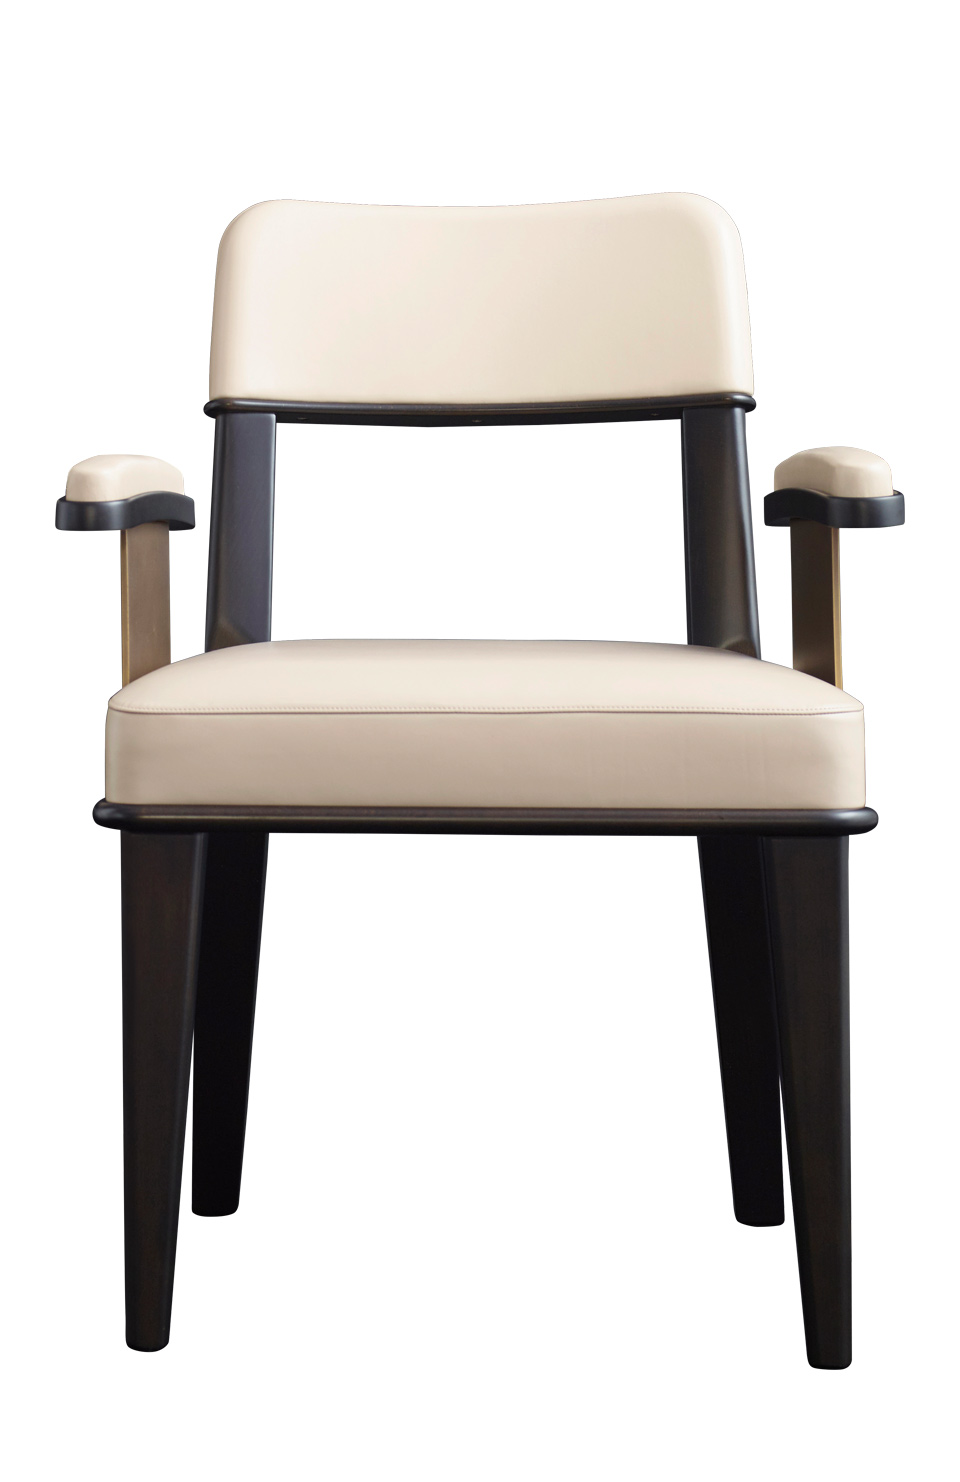 Vespertine is a wooden dining chair with leather seat and back and with or without armrests with bronze details, from Promemoria's Night Tales collection | Promemoria